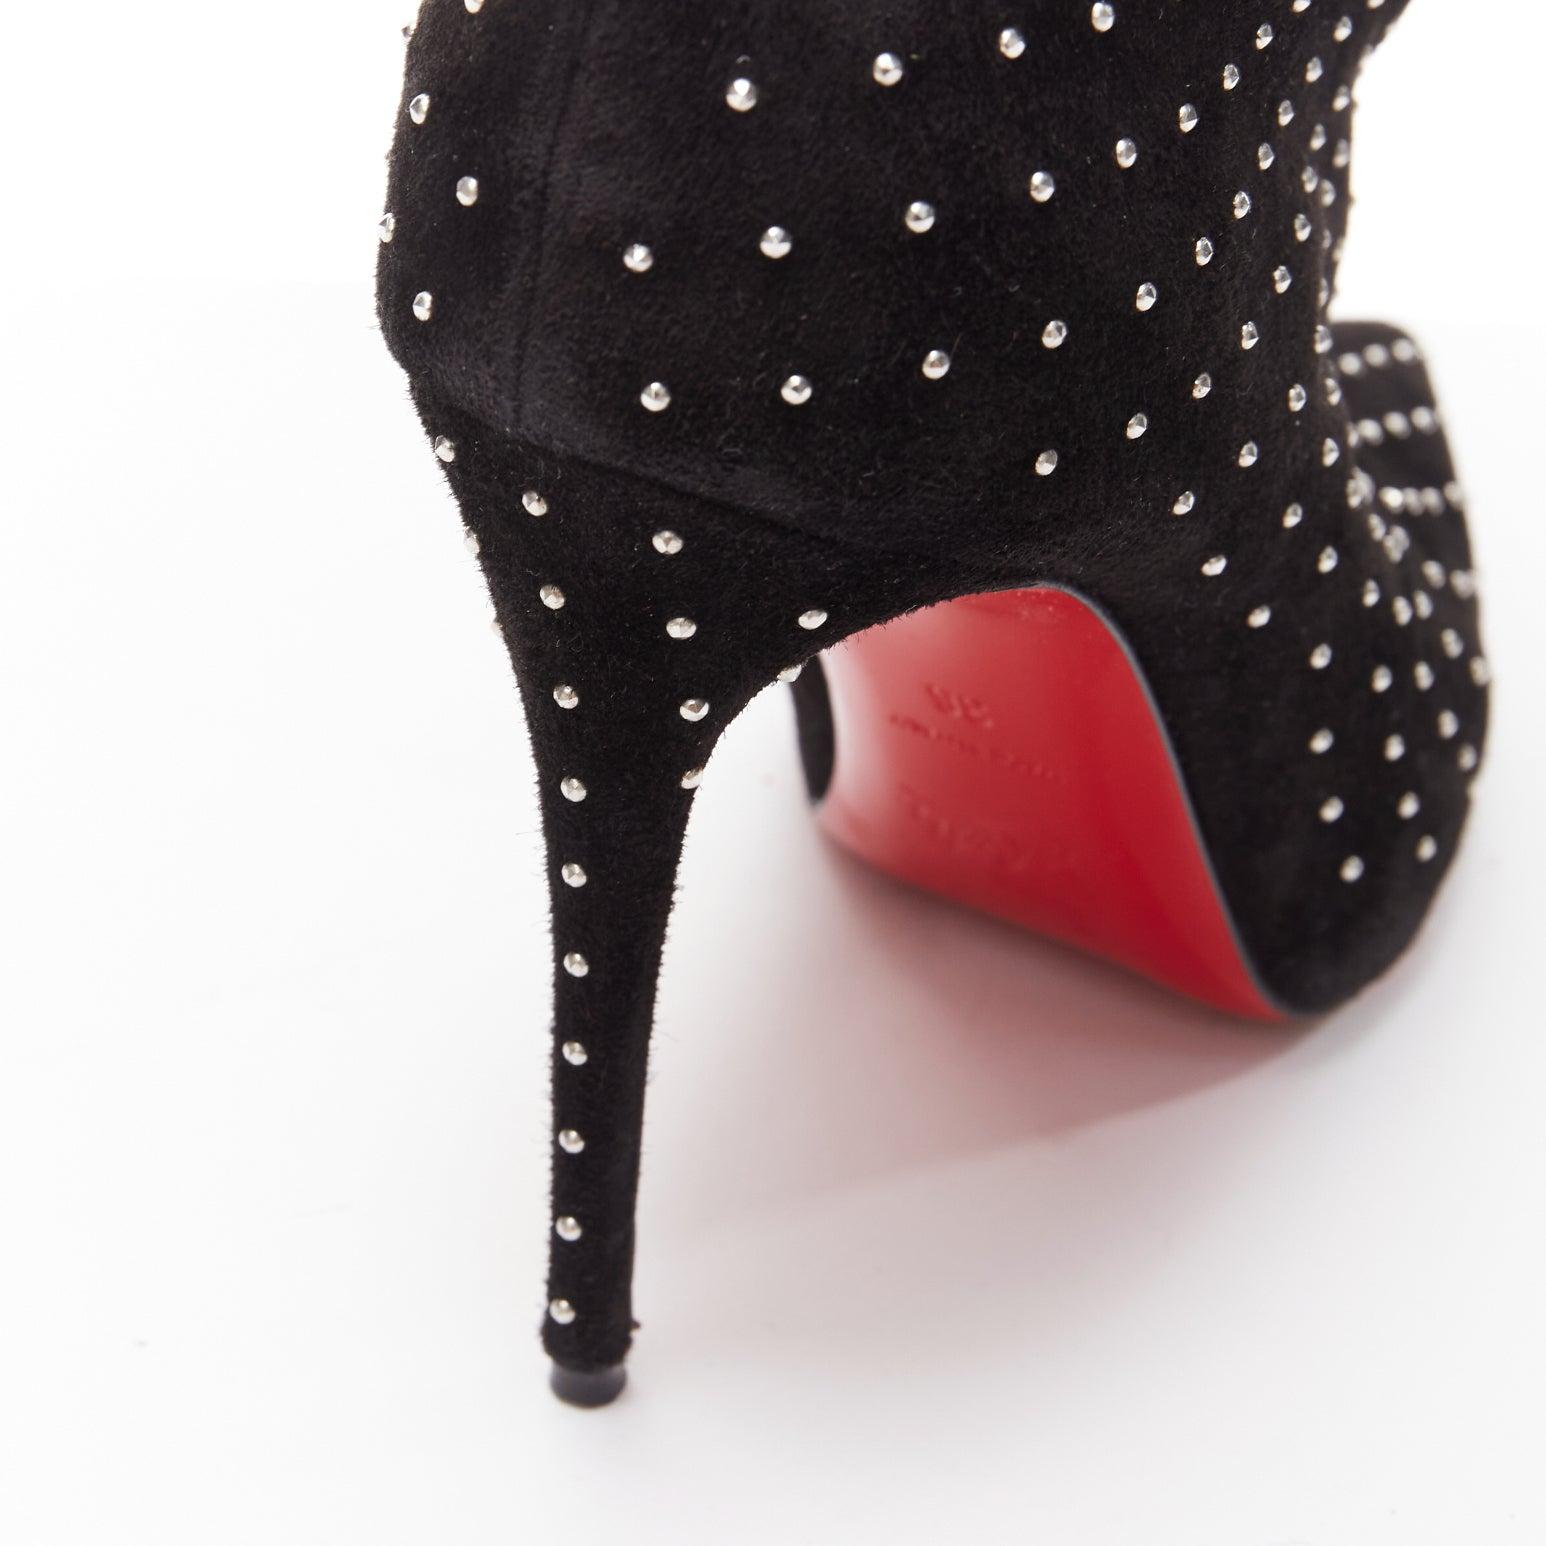 CHRISTIAN LOUBOUTIN So Kate Booty black suede micro stud embellished pointy EU36 For Sale 4